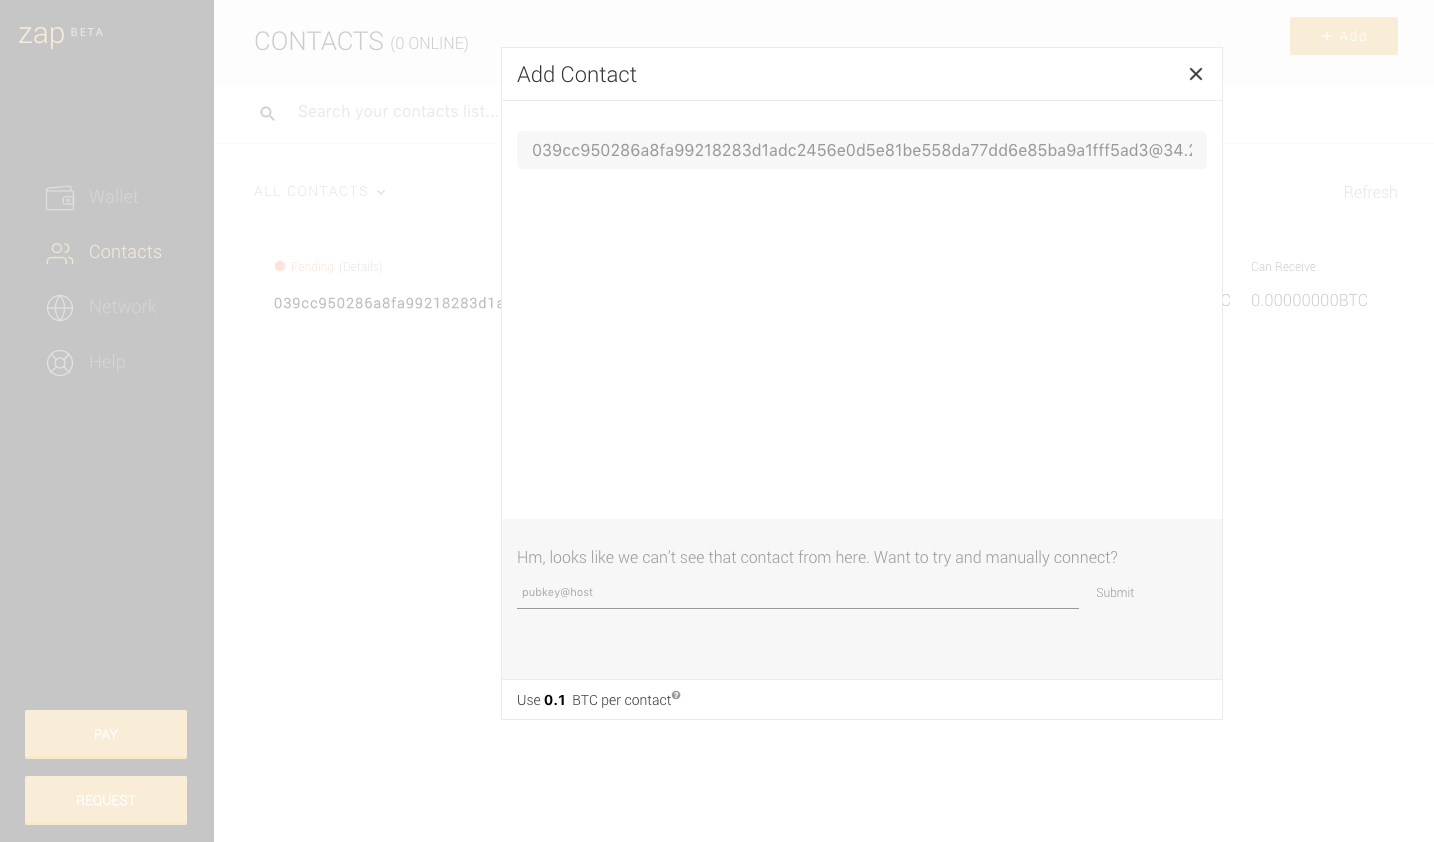 Zap add contact page